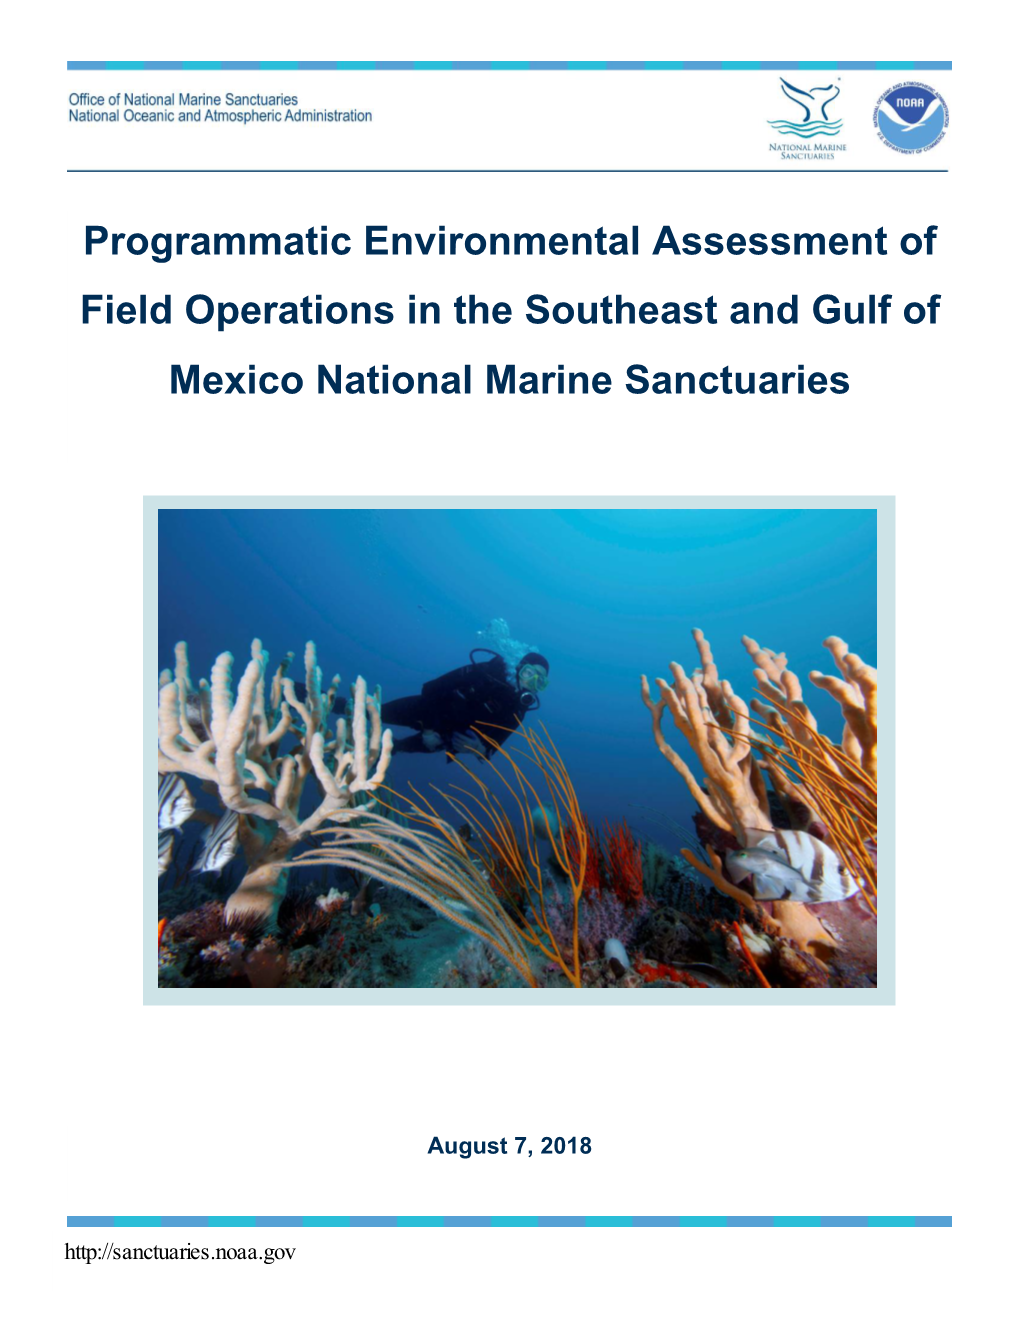 Programmatic Environmental Assessment of Field Operations in the Southeast and Gulf of Mexico National Marine Sanctuaries